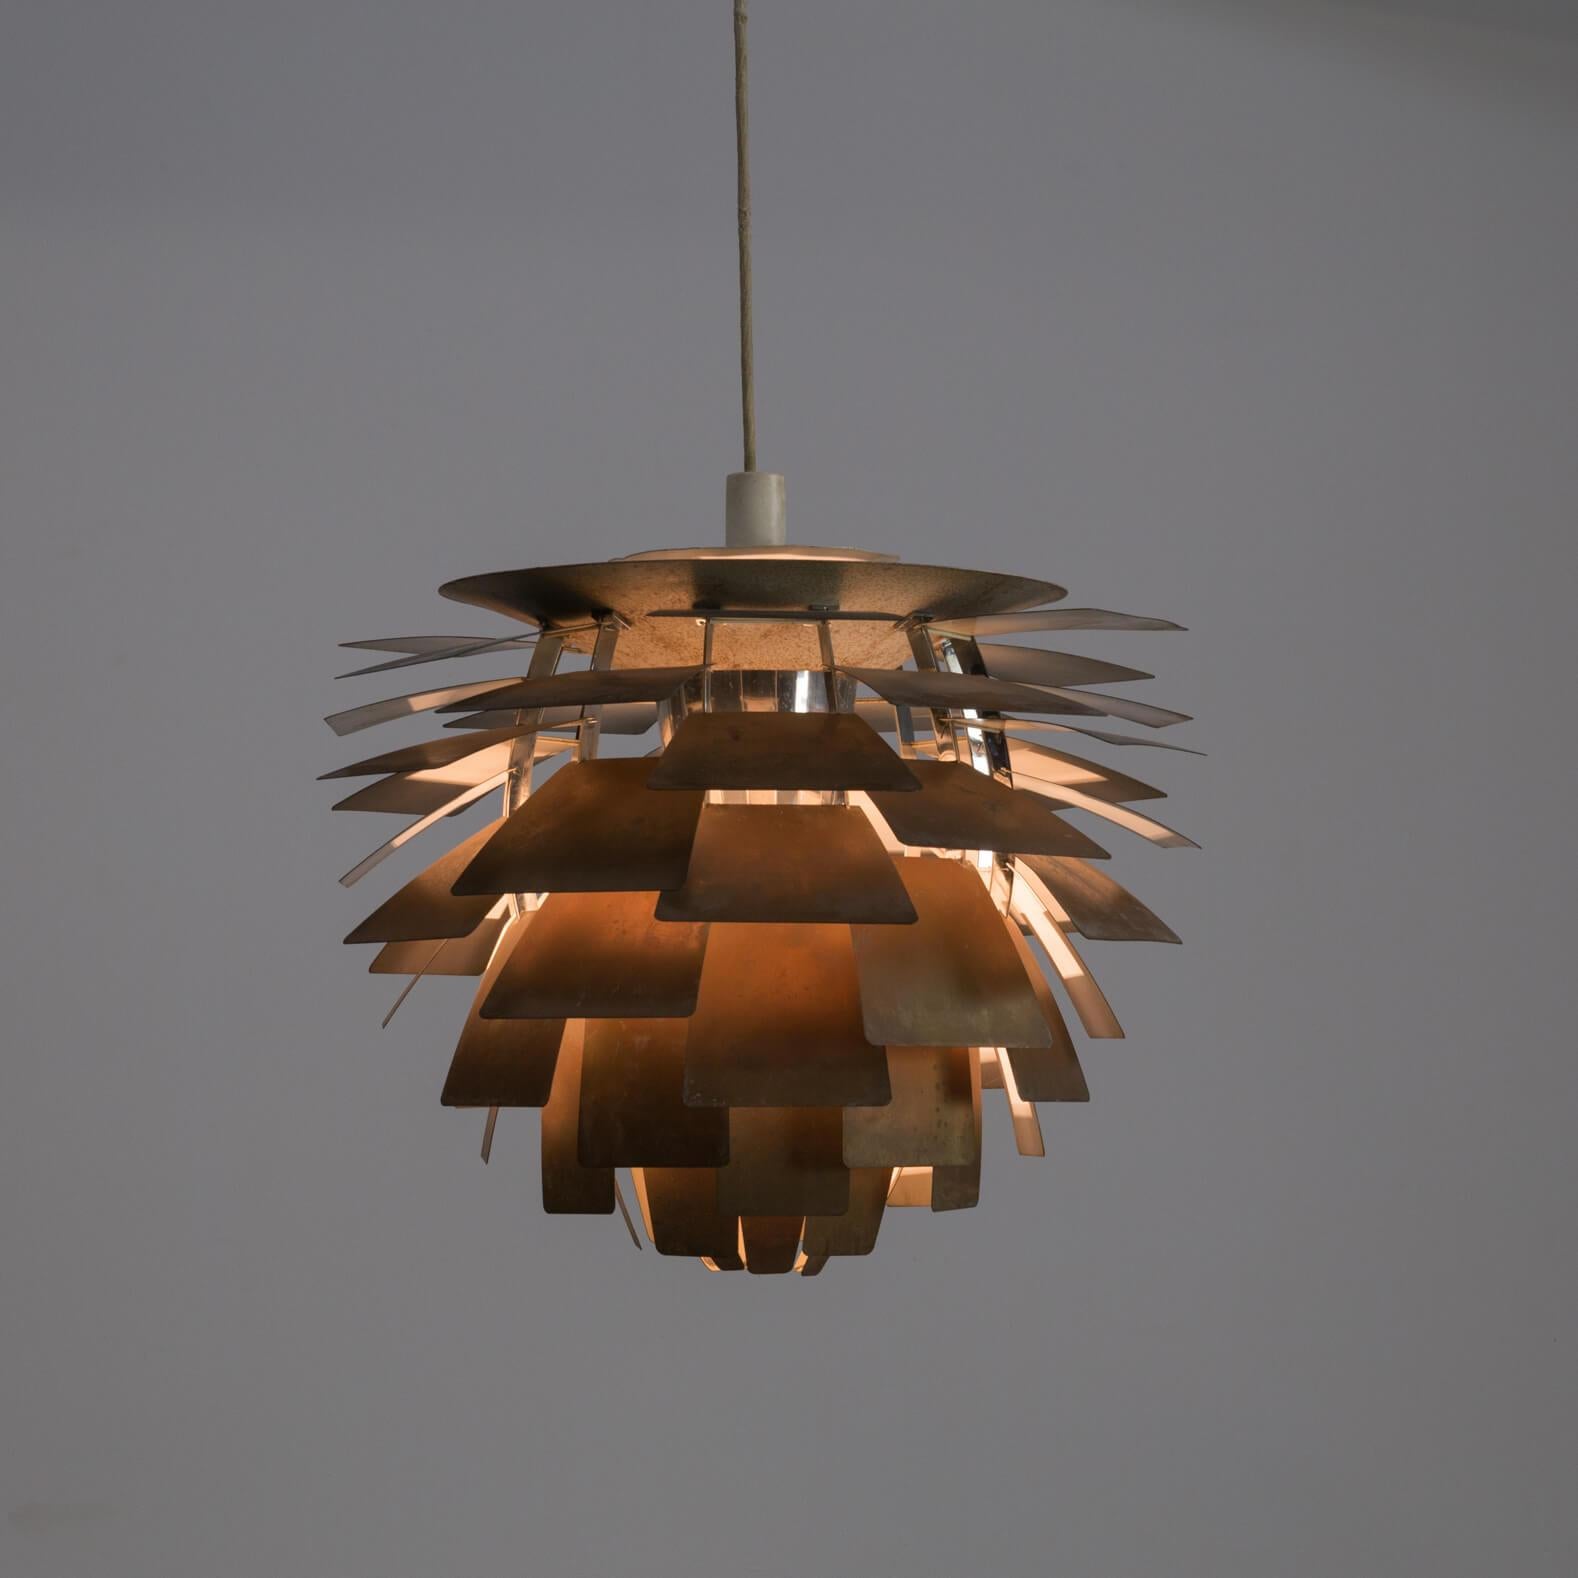 1960s Poul Henningsen ‘Artichoke’ pendant lamp for Louis Poulsen. Original unrestored good and working condition.
Poul Henningsen has crowned his work with this design. Poul Henningsen grew up at a time when lighting still consisted of petroleum